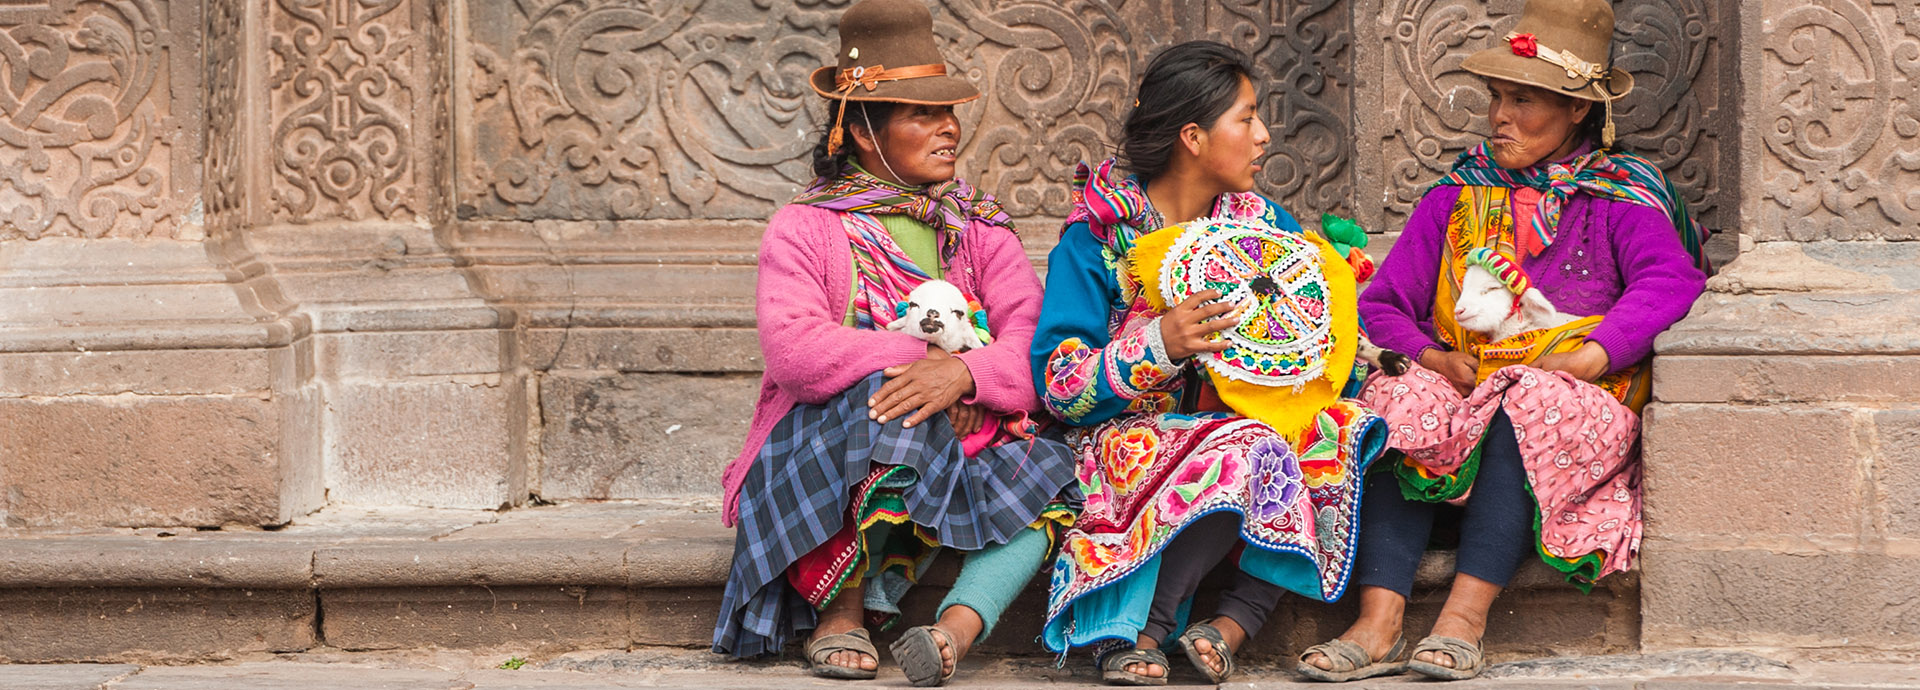 Inca culture in Cusco is a highlight on any holiday to Peru